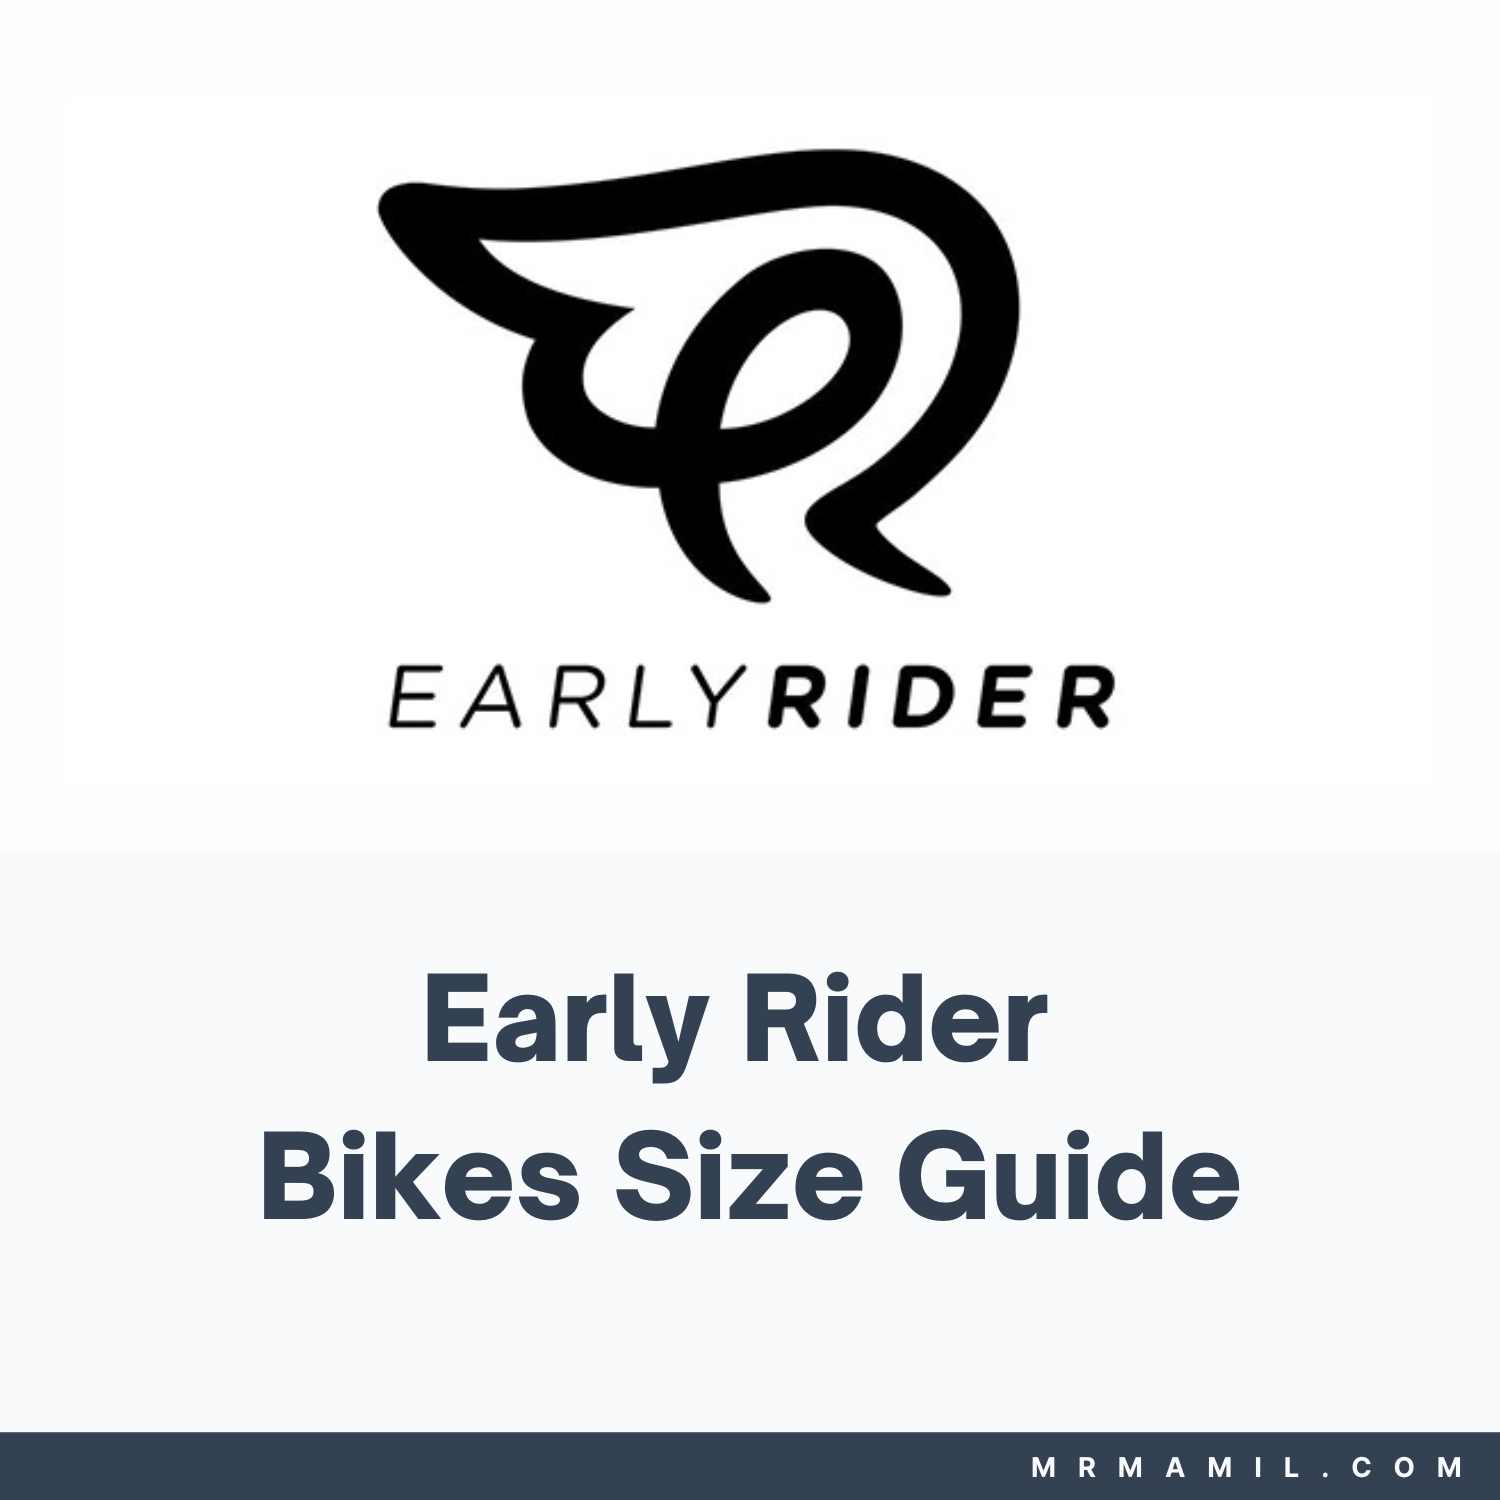 Early Rider Bikes Size Guide